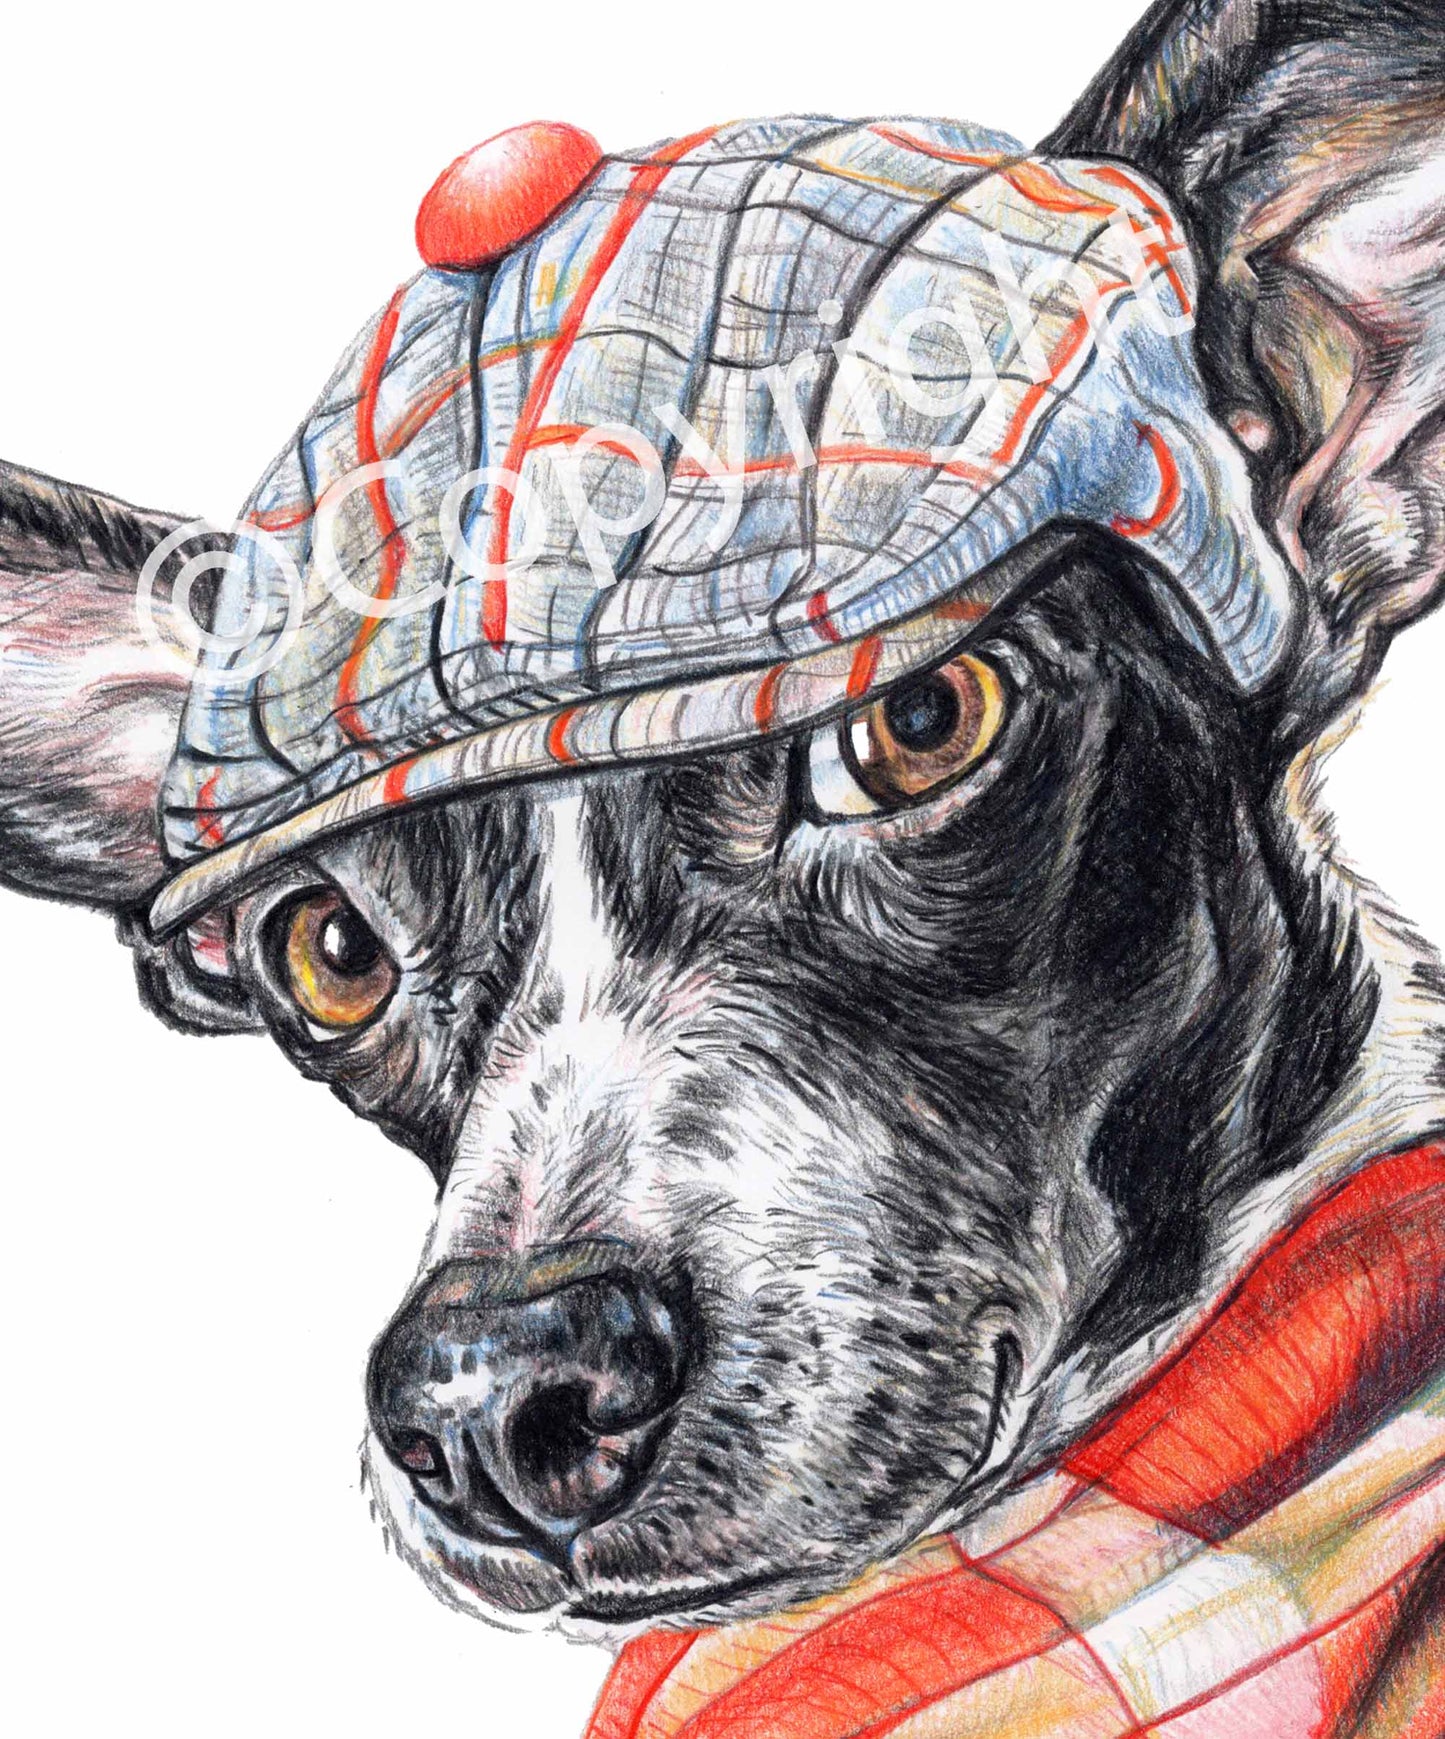 Coloured pencil drawing of a black and white terrier mix dog wearing a dapper cap and woold scarf. Art by Deidre Wicks